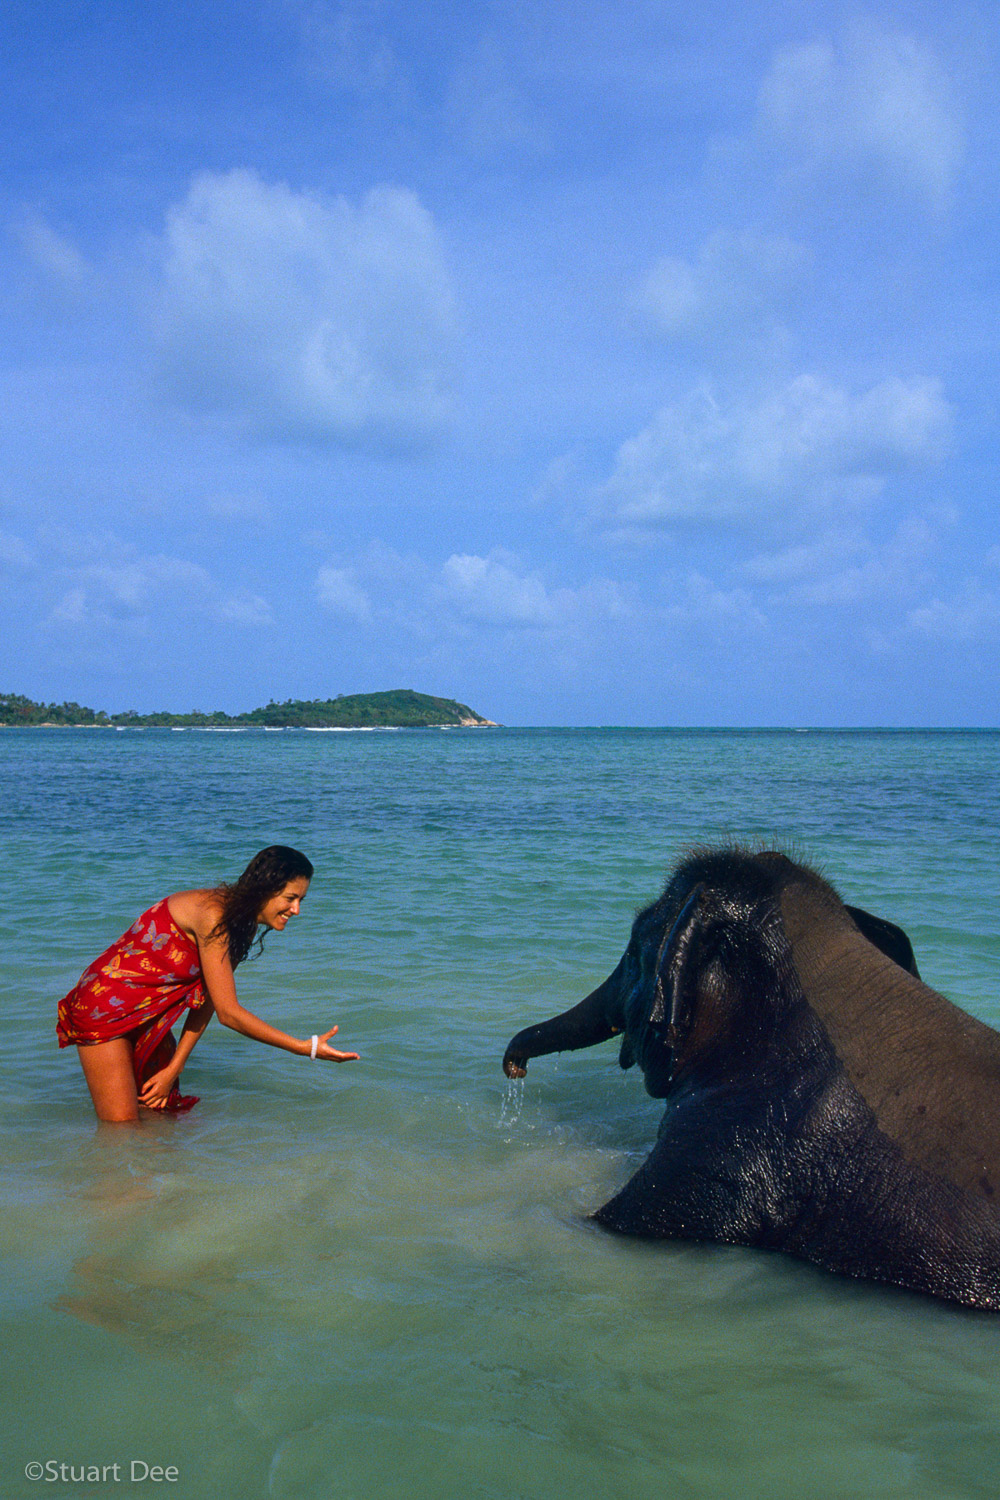  Young woman interacting with baby elephant, Chaweng Beach, Samui, Thailand   R 